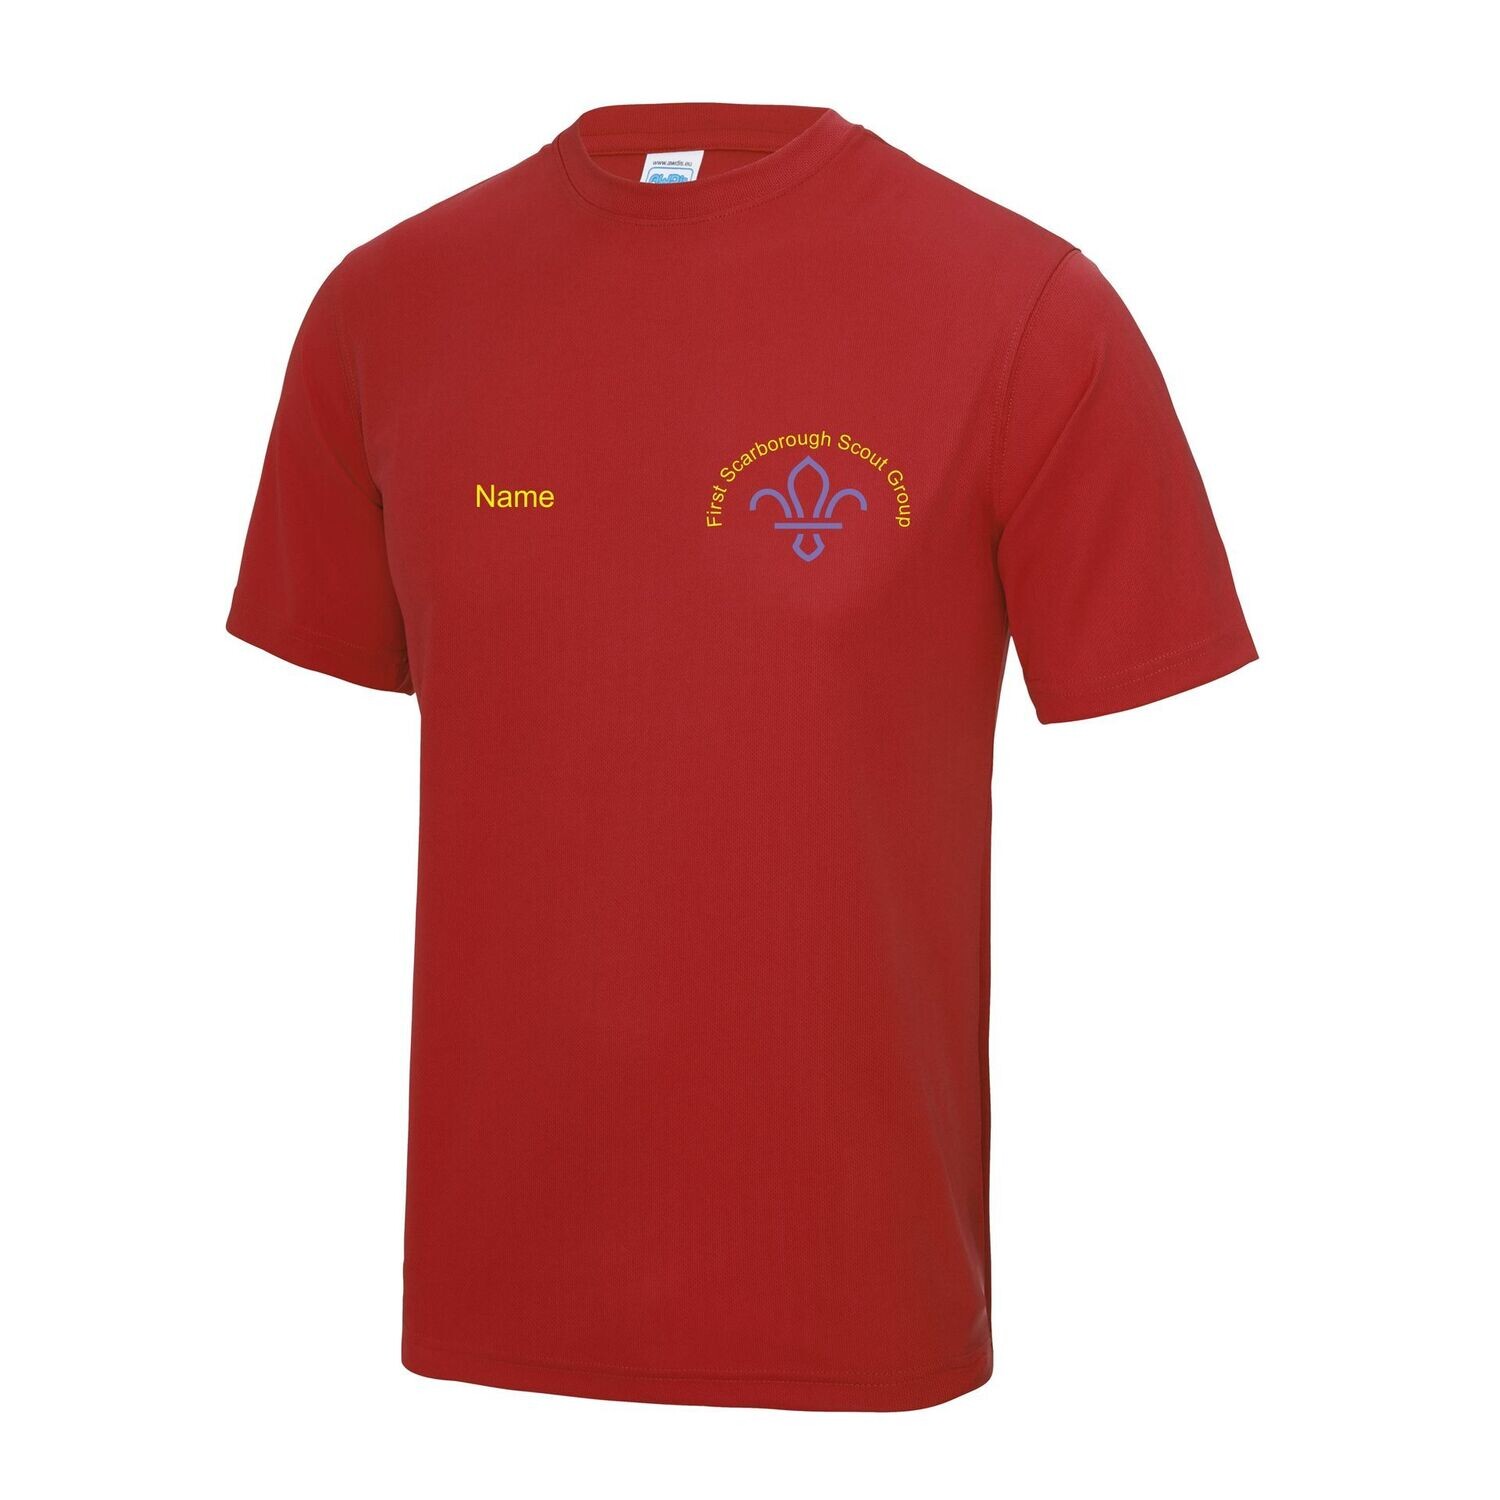 First Scarborough Scouts Adult Cool Tec T-shirt